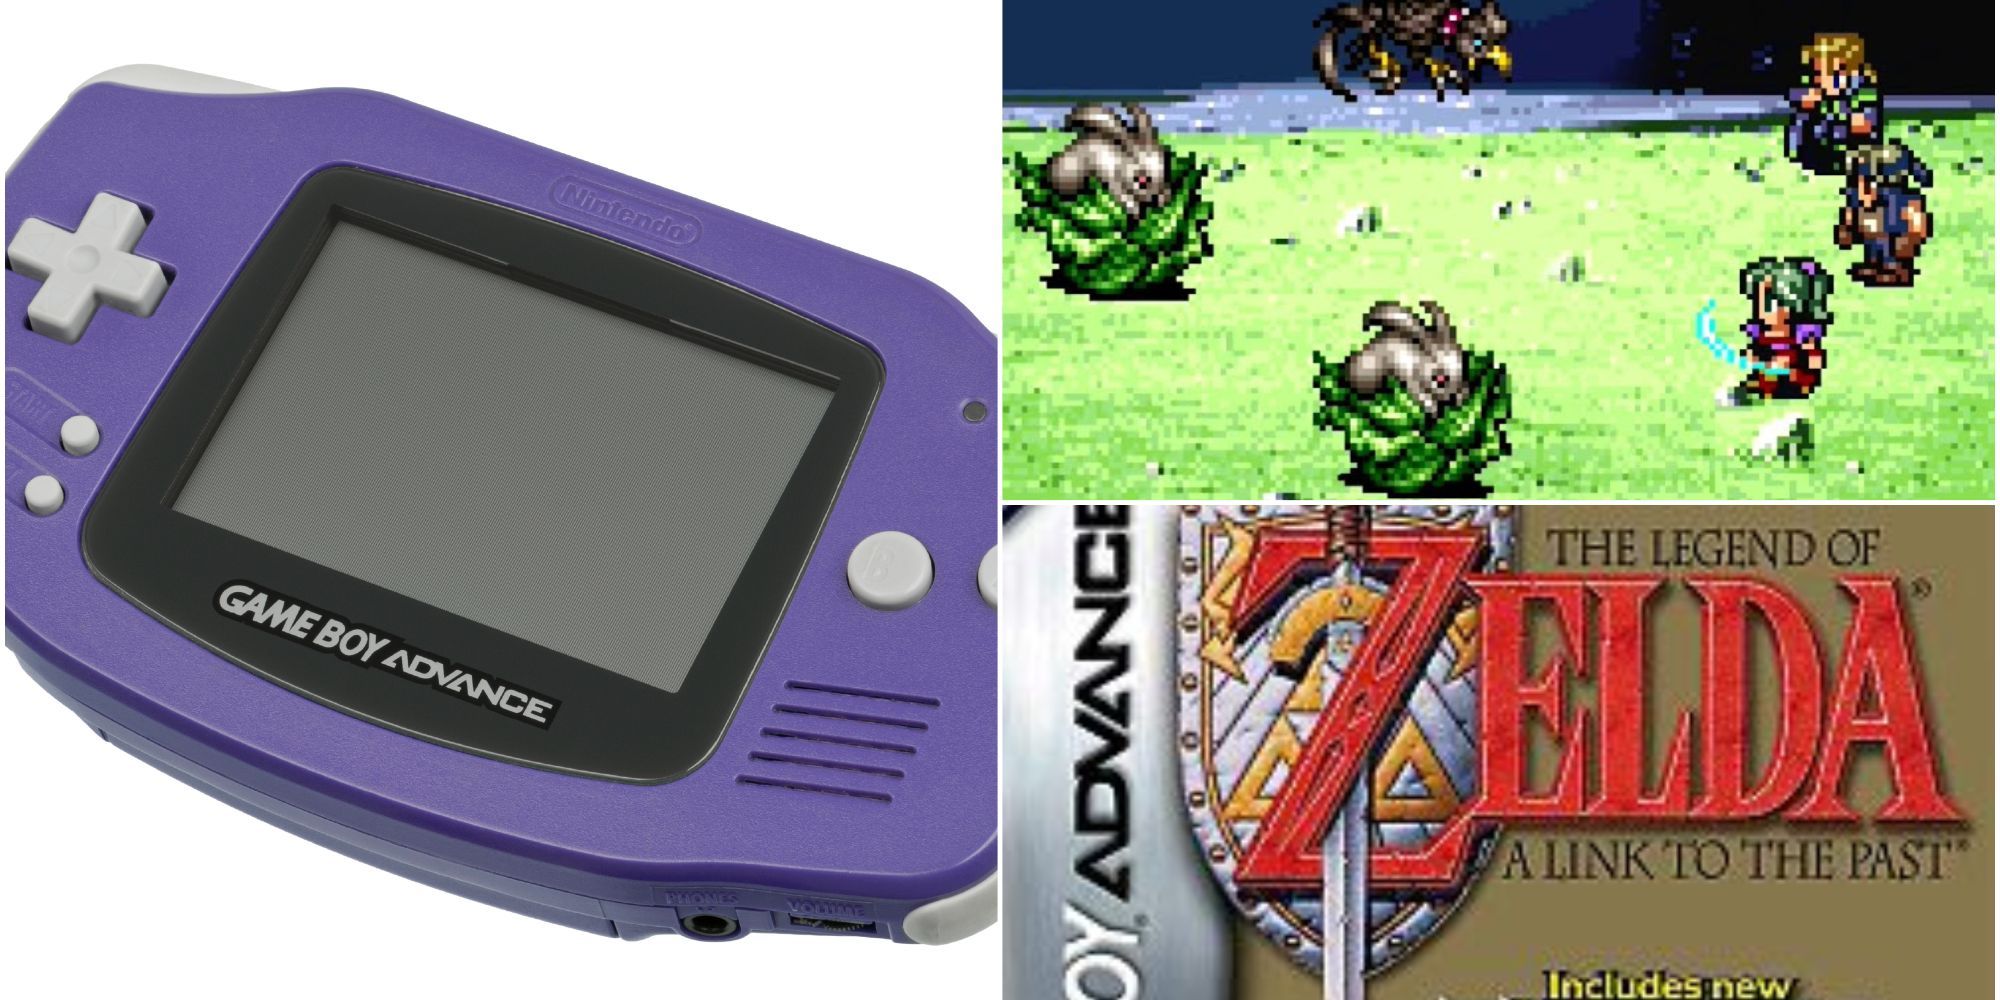 A purple Gameboy Advance beside its titles The Legend of Zelda: A Link To The Past and Final Fantasy 3